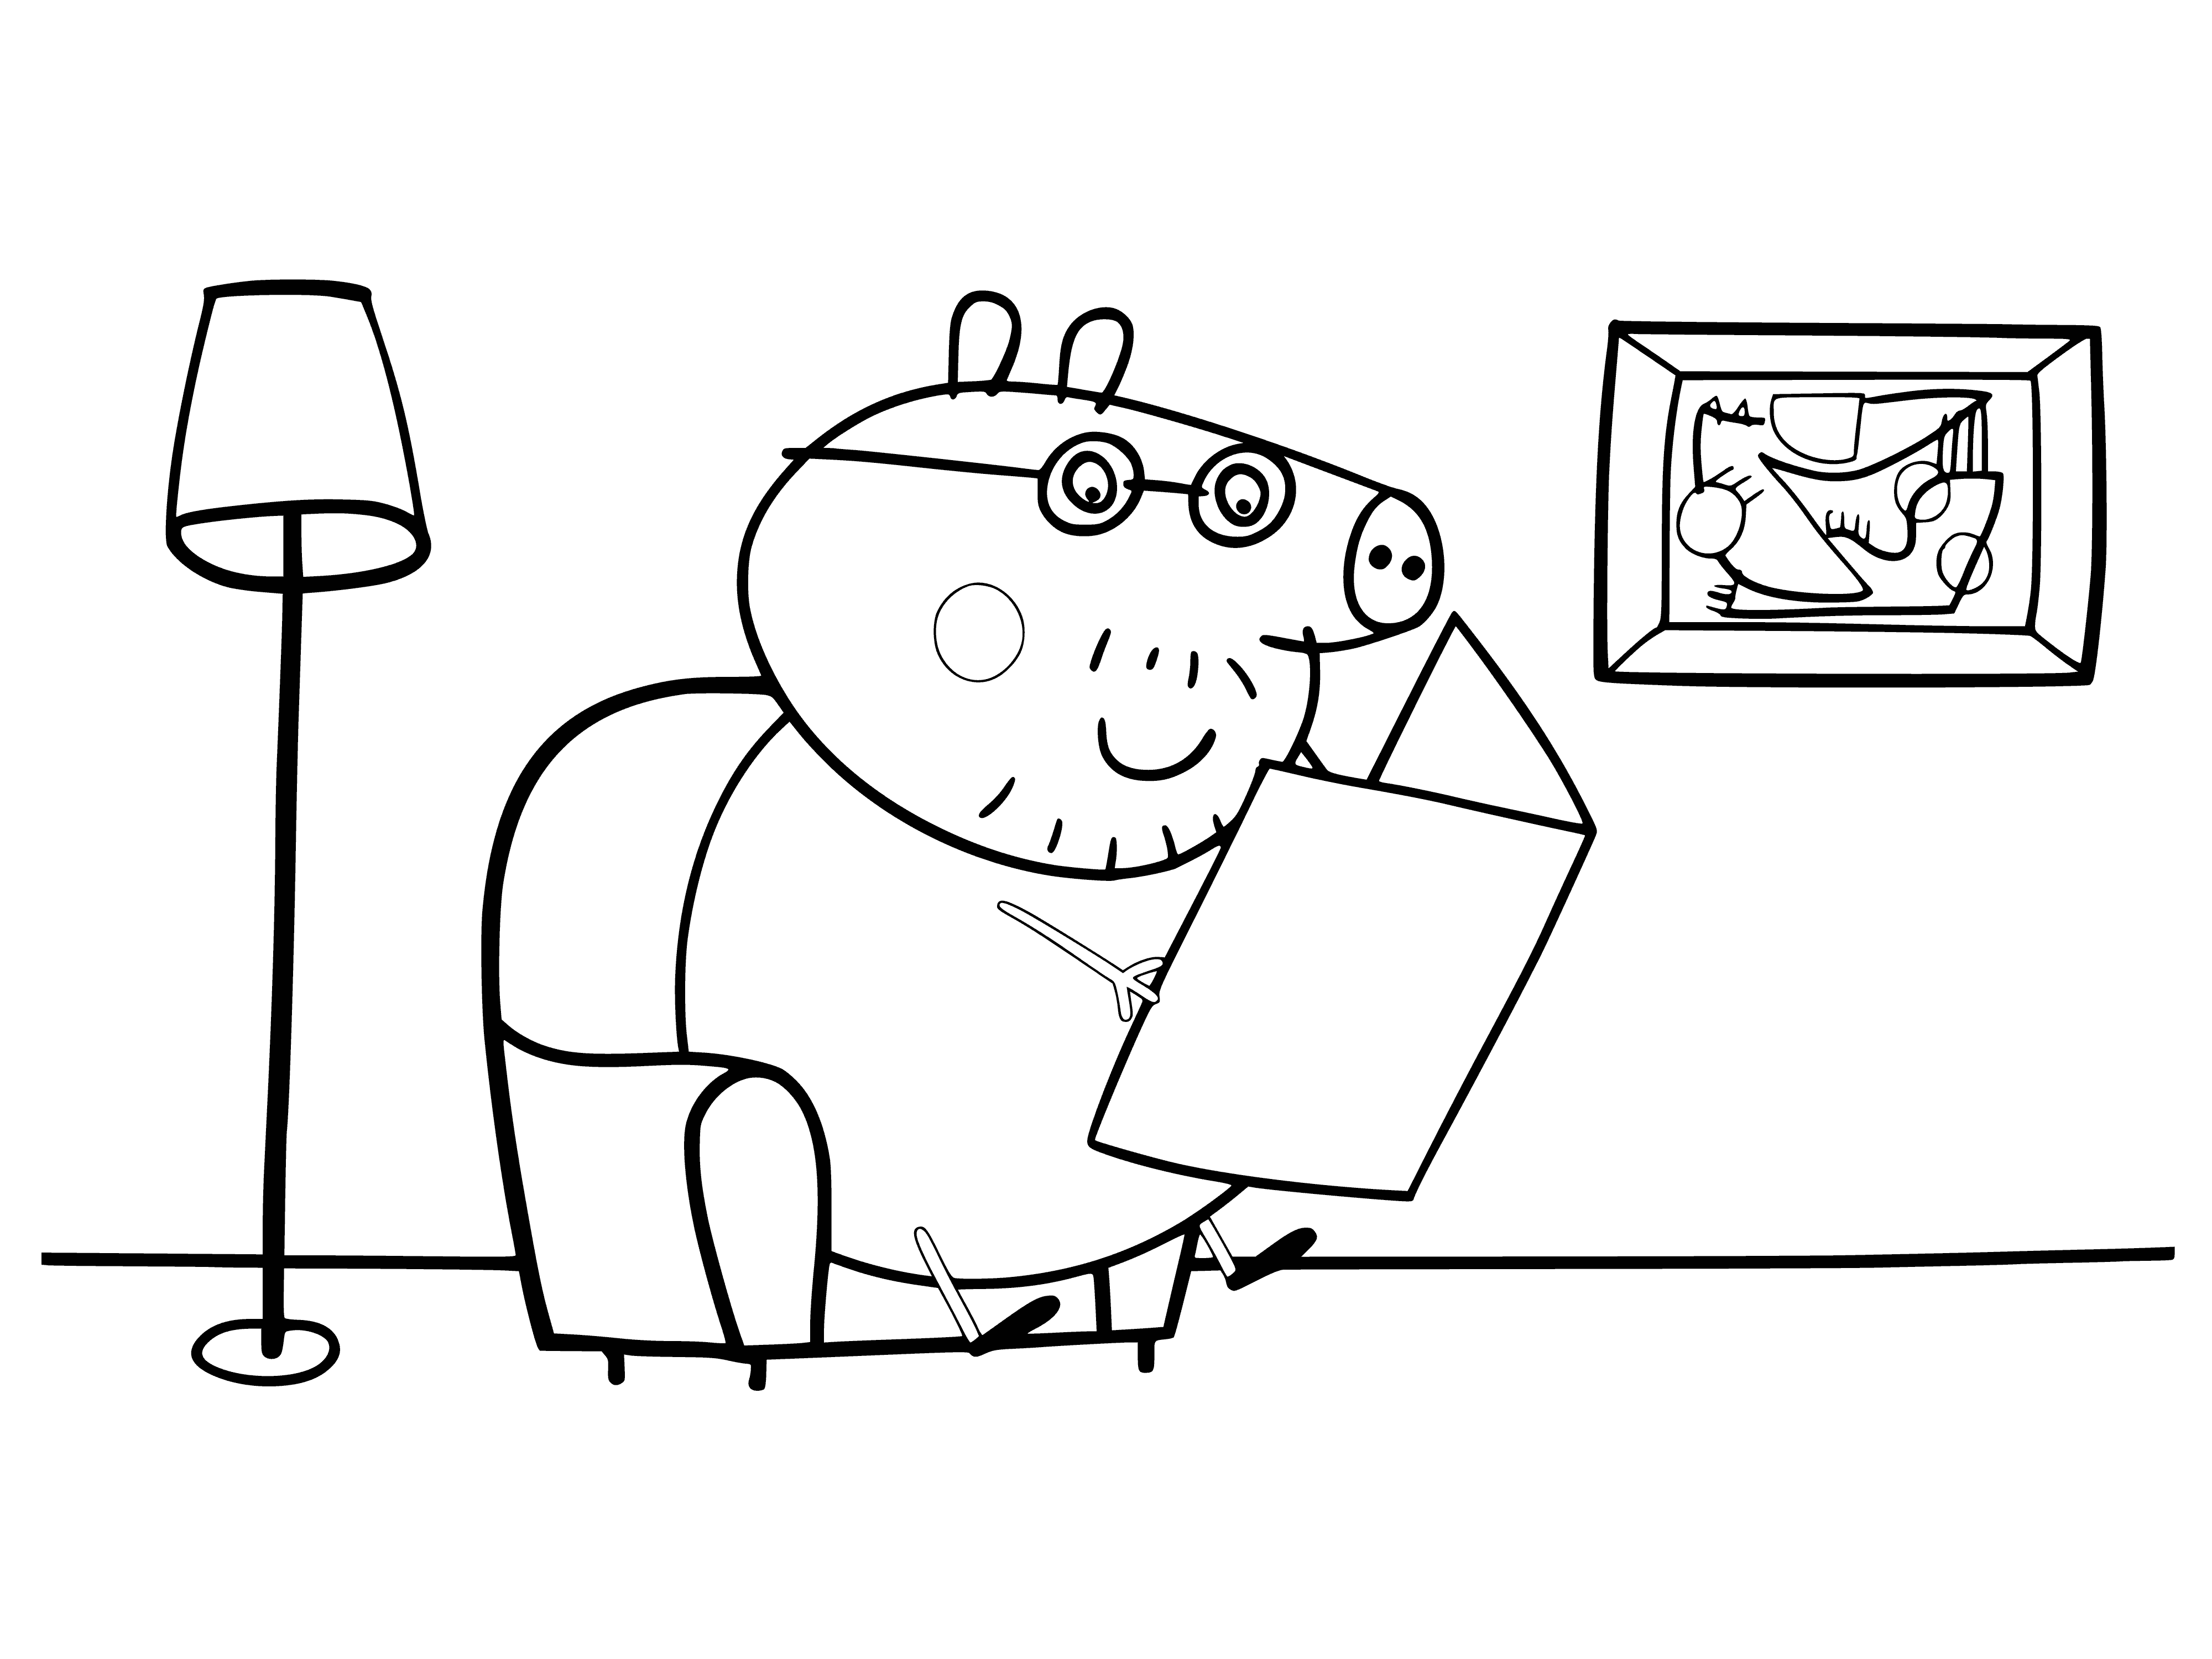 coloring page: Peppa's dad reads the newspaper intently, pencil in mouth and paper in hand while sitting in a chair.